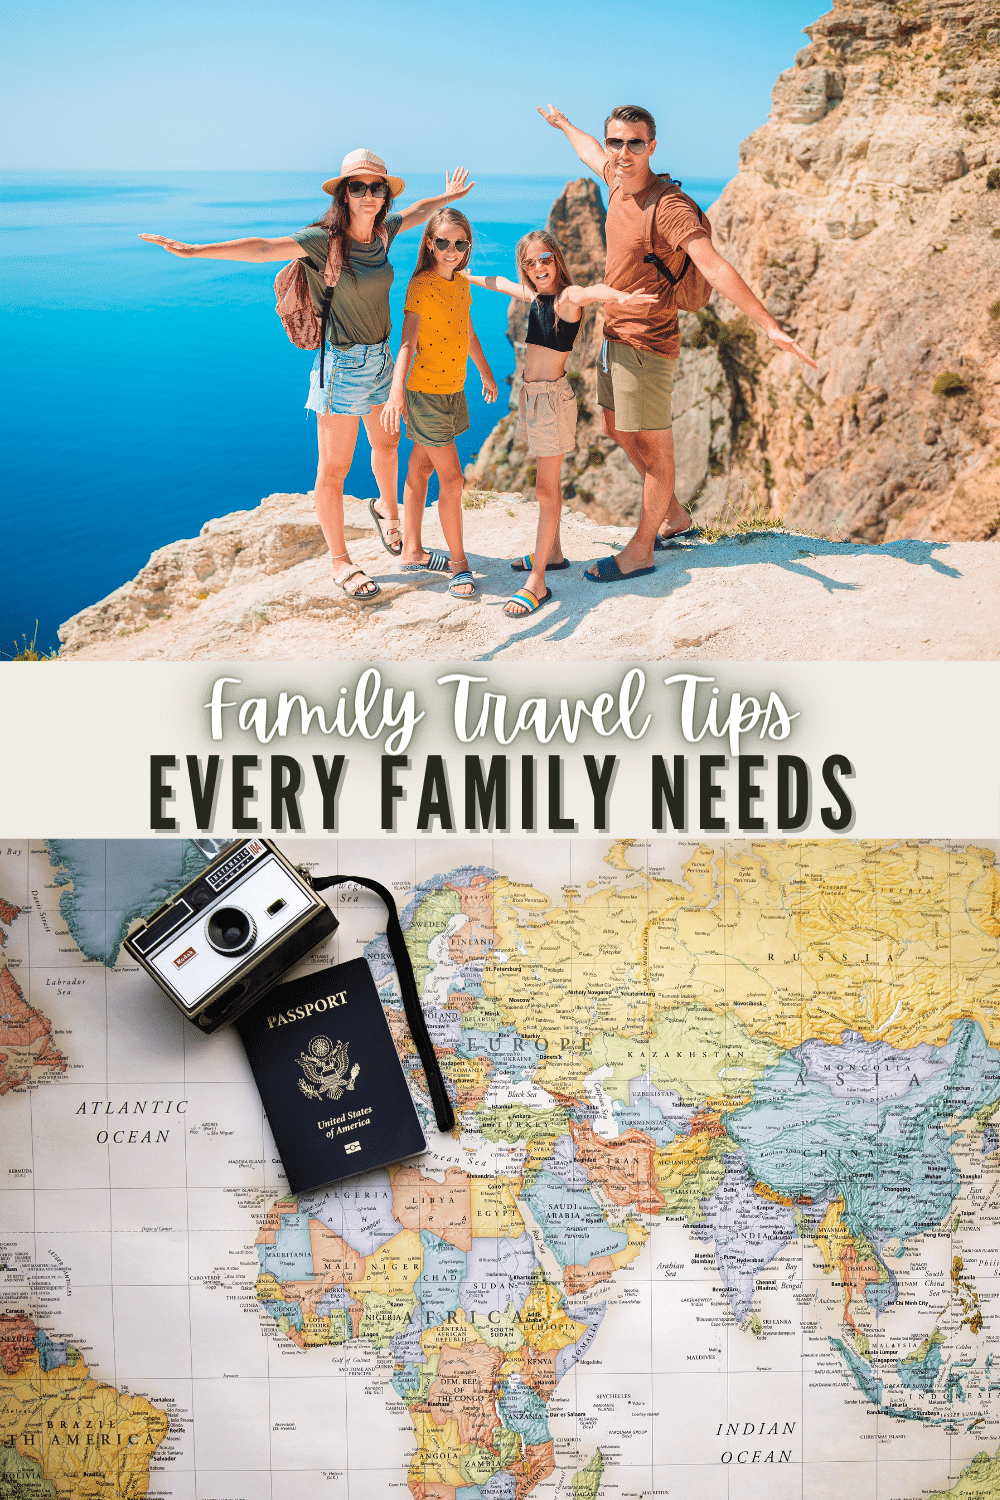 These family travel tips are perfect for any type of family vacation, Spring break, summer fun or holiday adventure! Simple and easy to implement! #travel #traveltips #family #vacation via @wondermomwannab